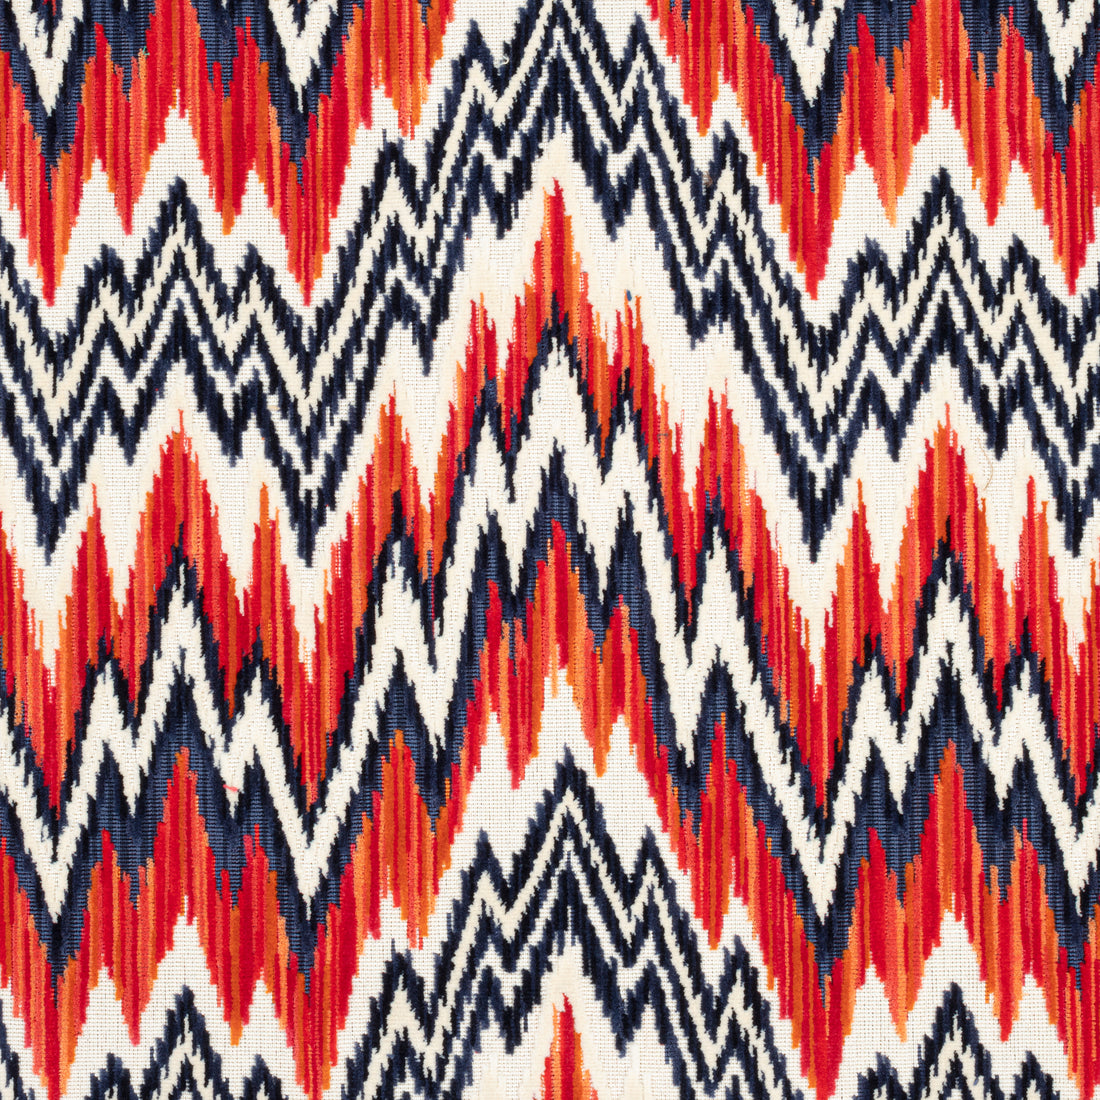 Rhythm Velvet fabric in flame and navy color - pattern number W72816 - by Thibaut in the Woven Resource 13: Fusion Velvets collection